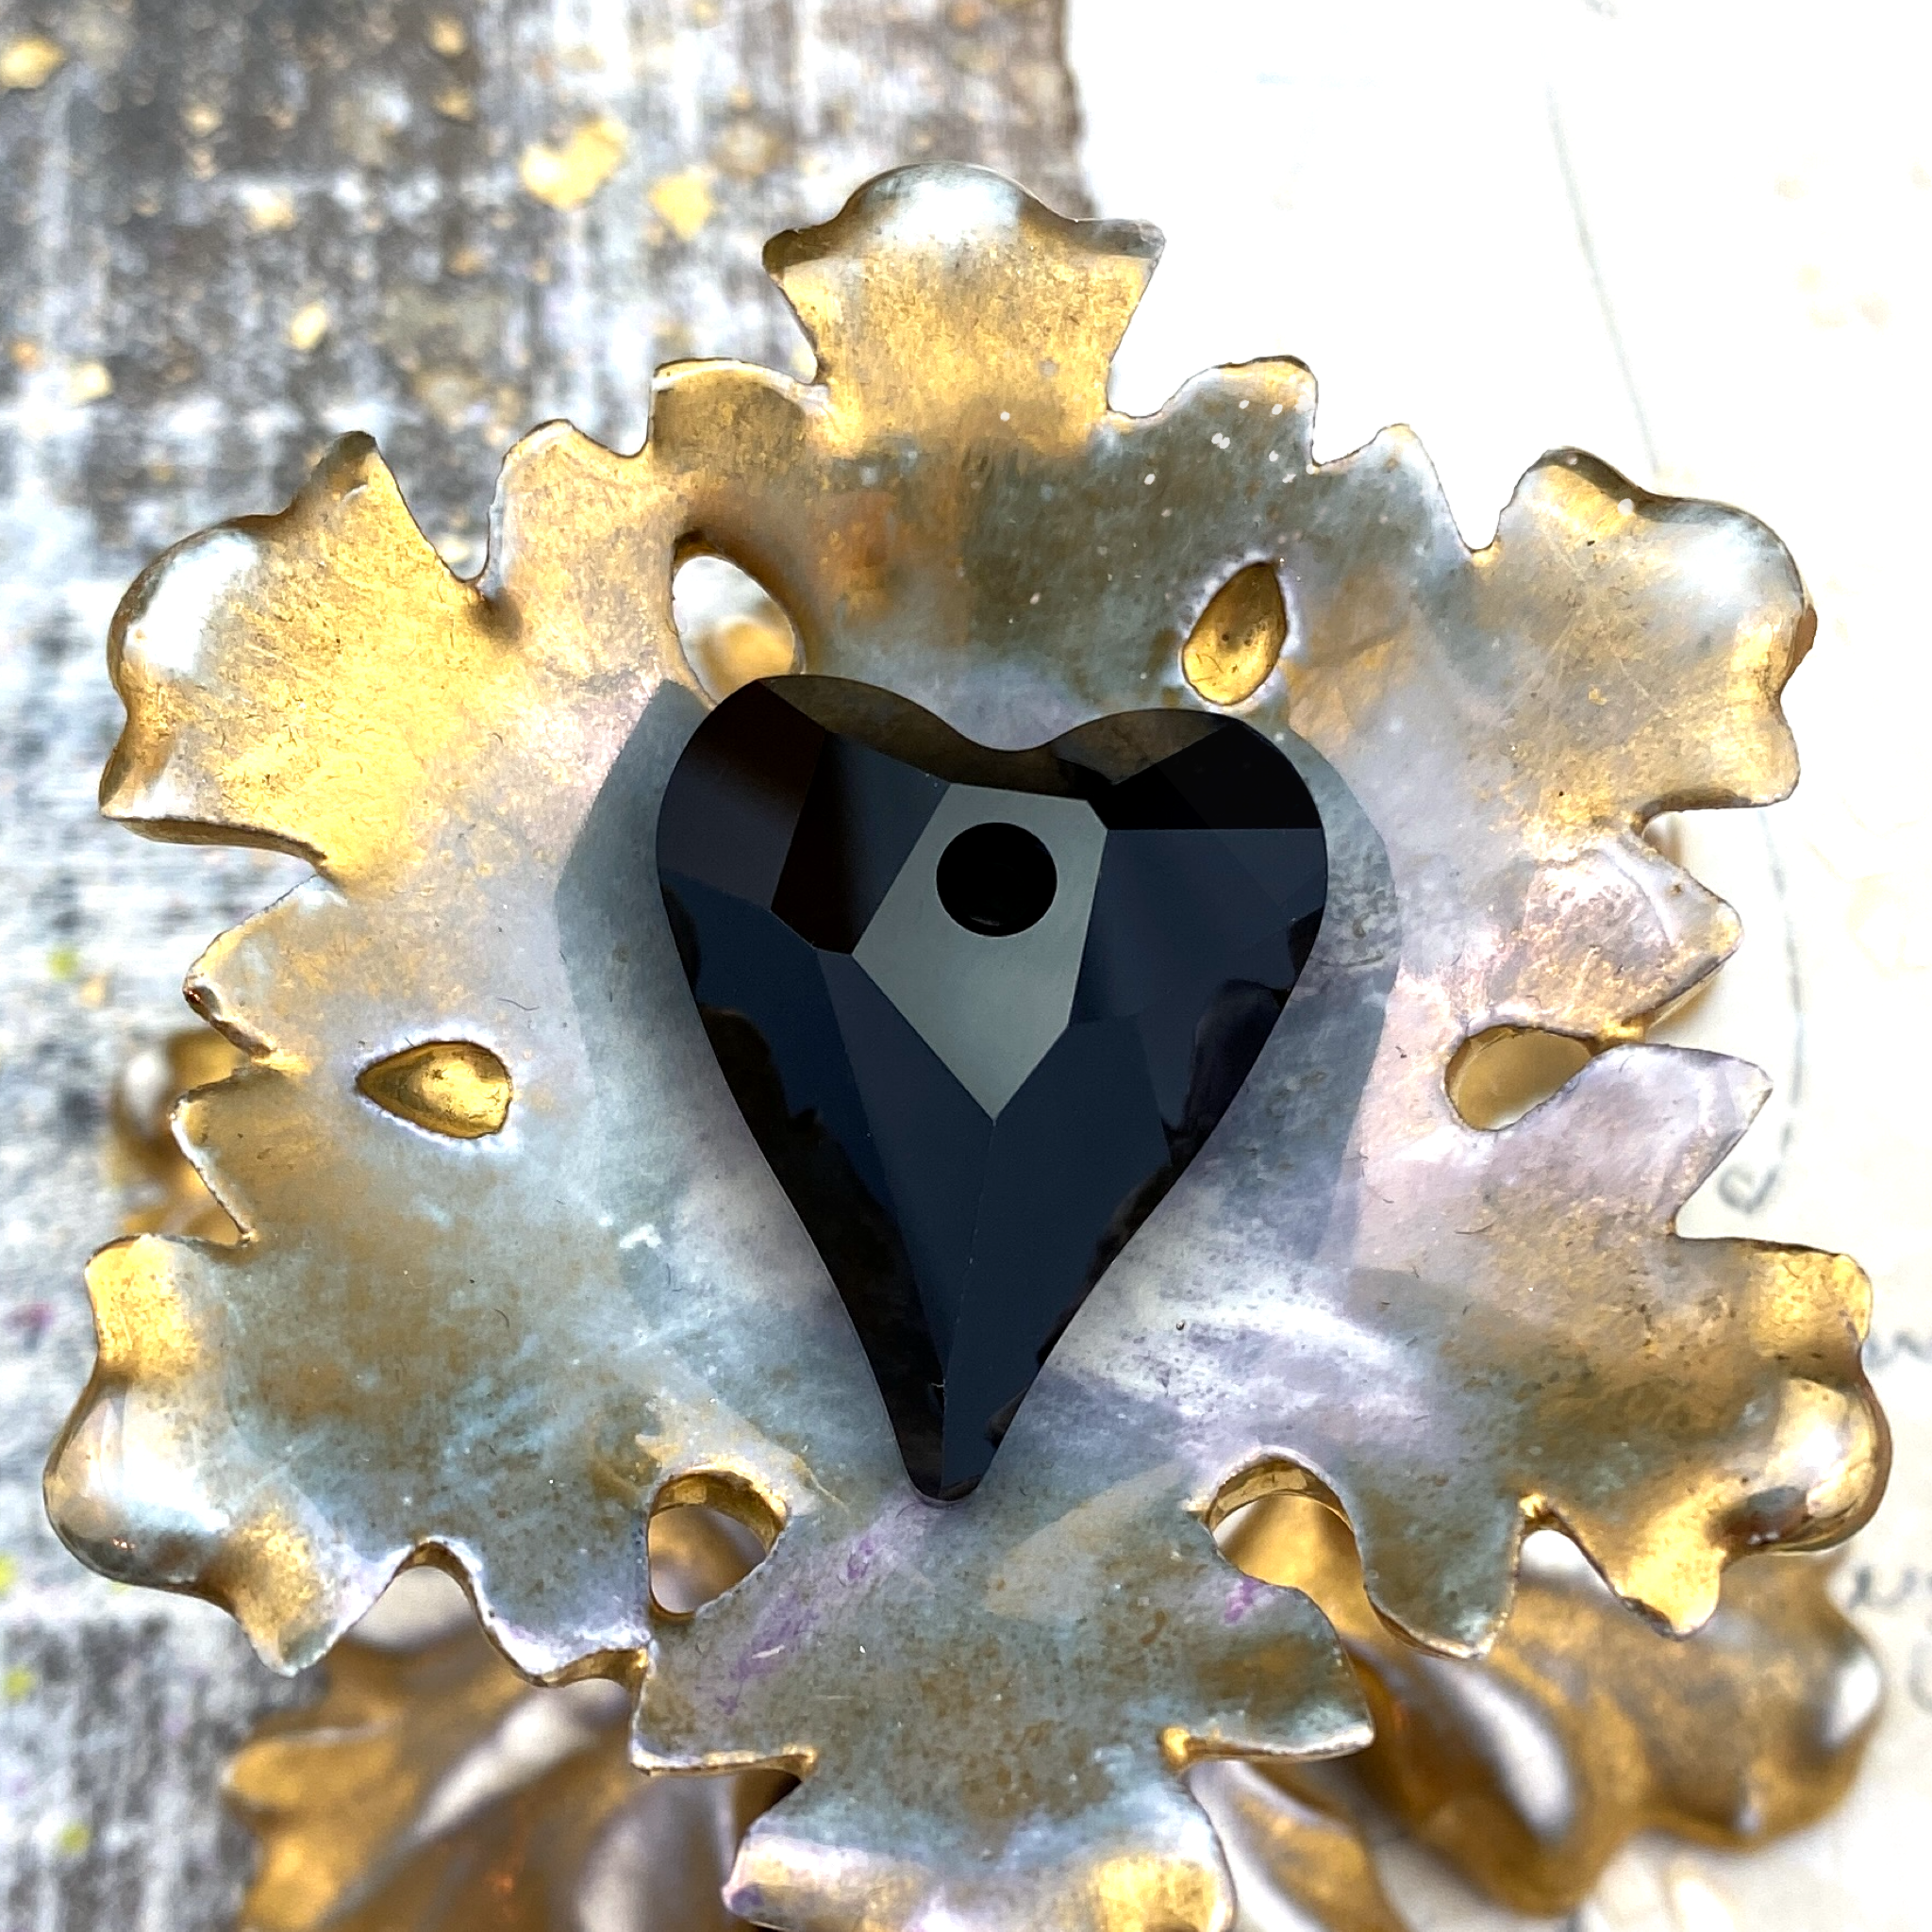 Large 27mm K9 Heart Shaped Stone With Gold Claw Crystal Sewing